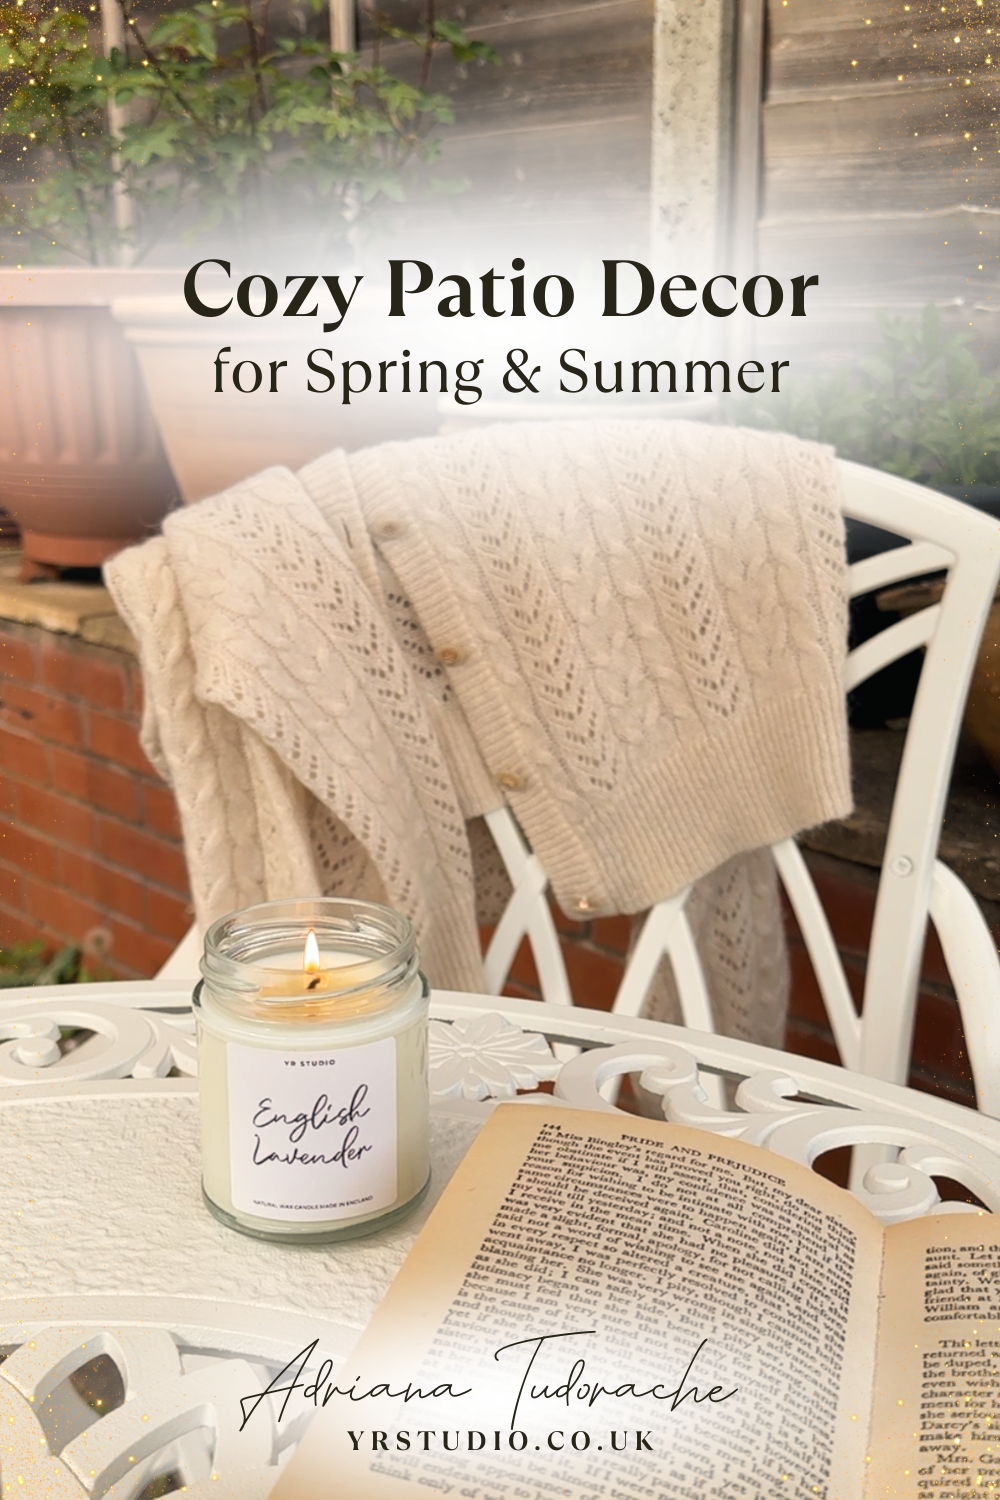 Cozy cottag style patio candles